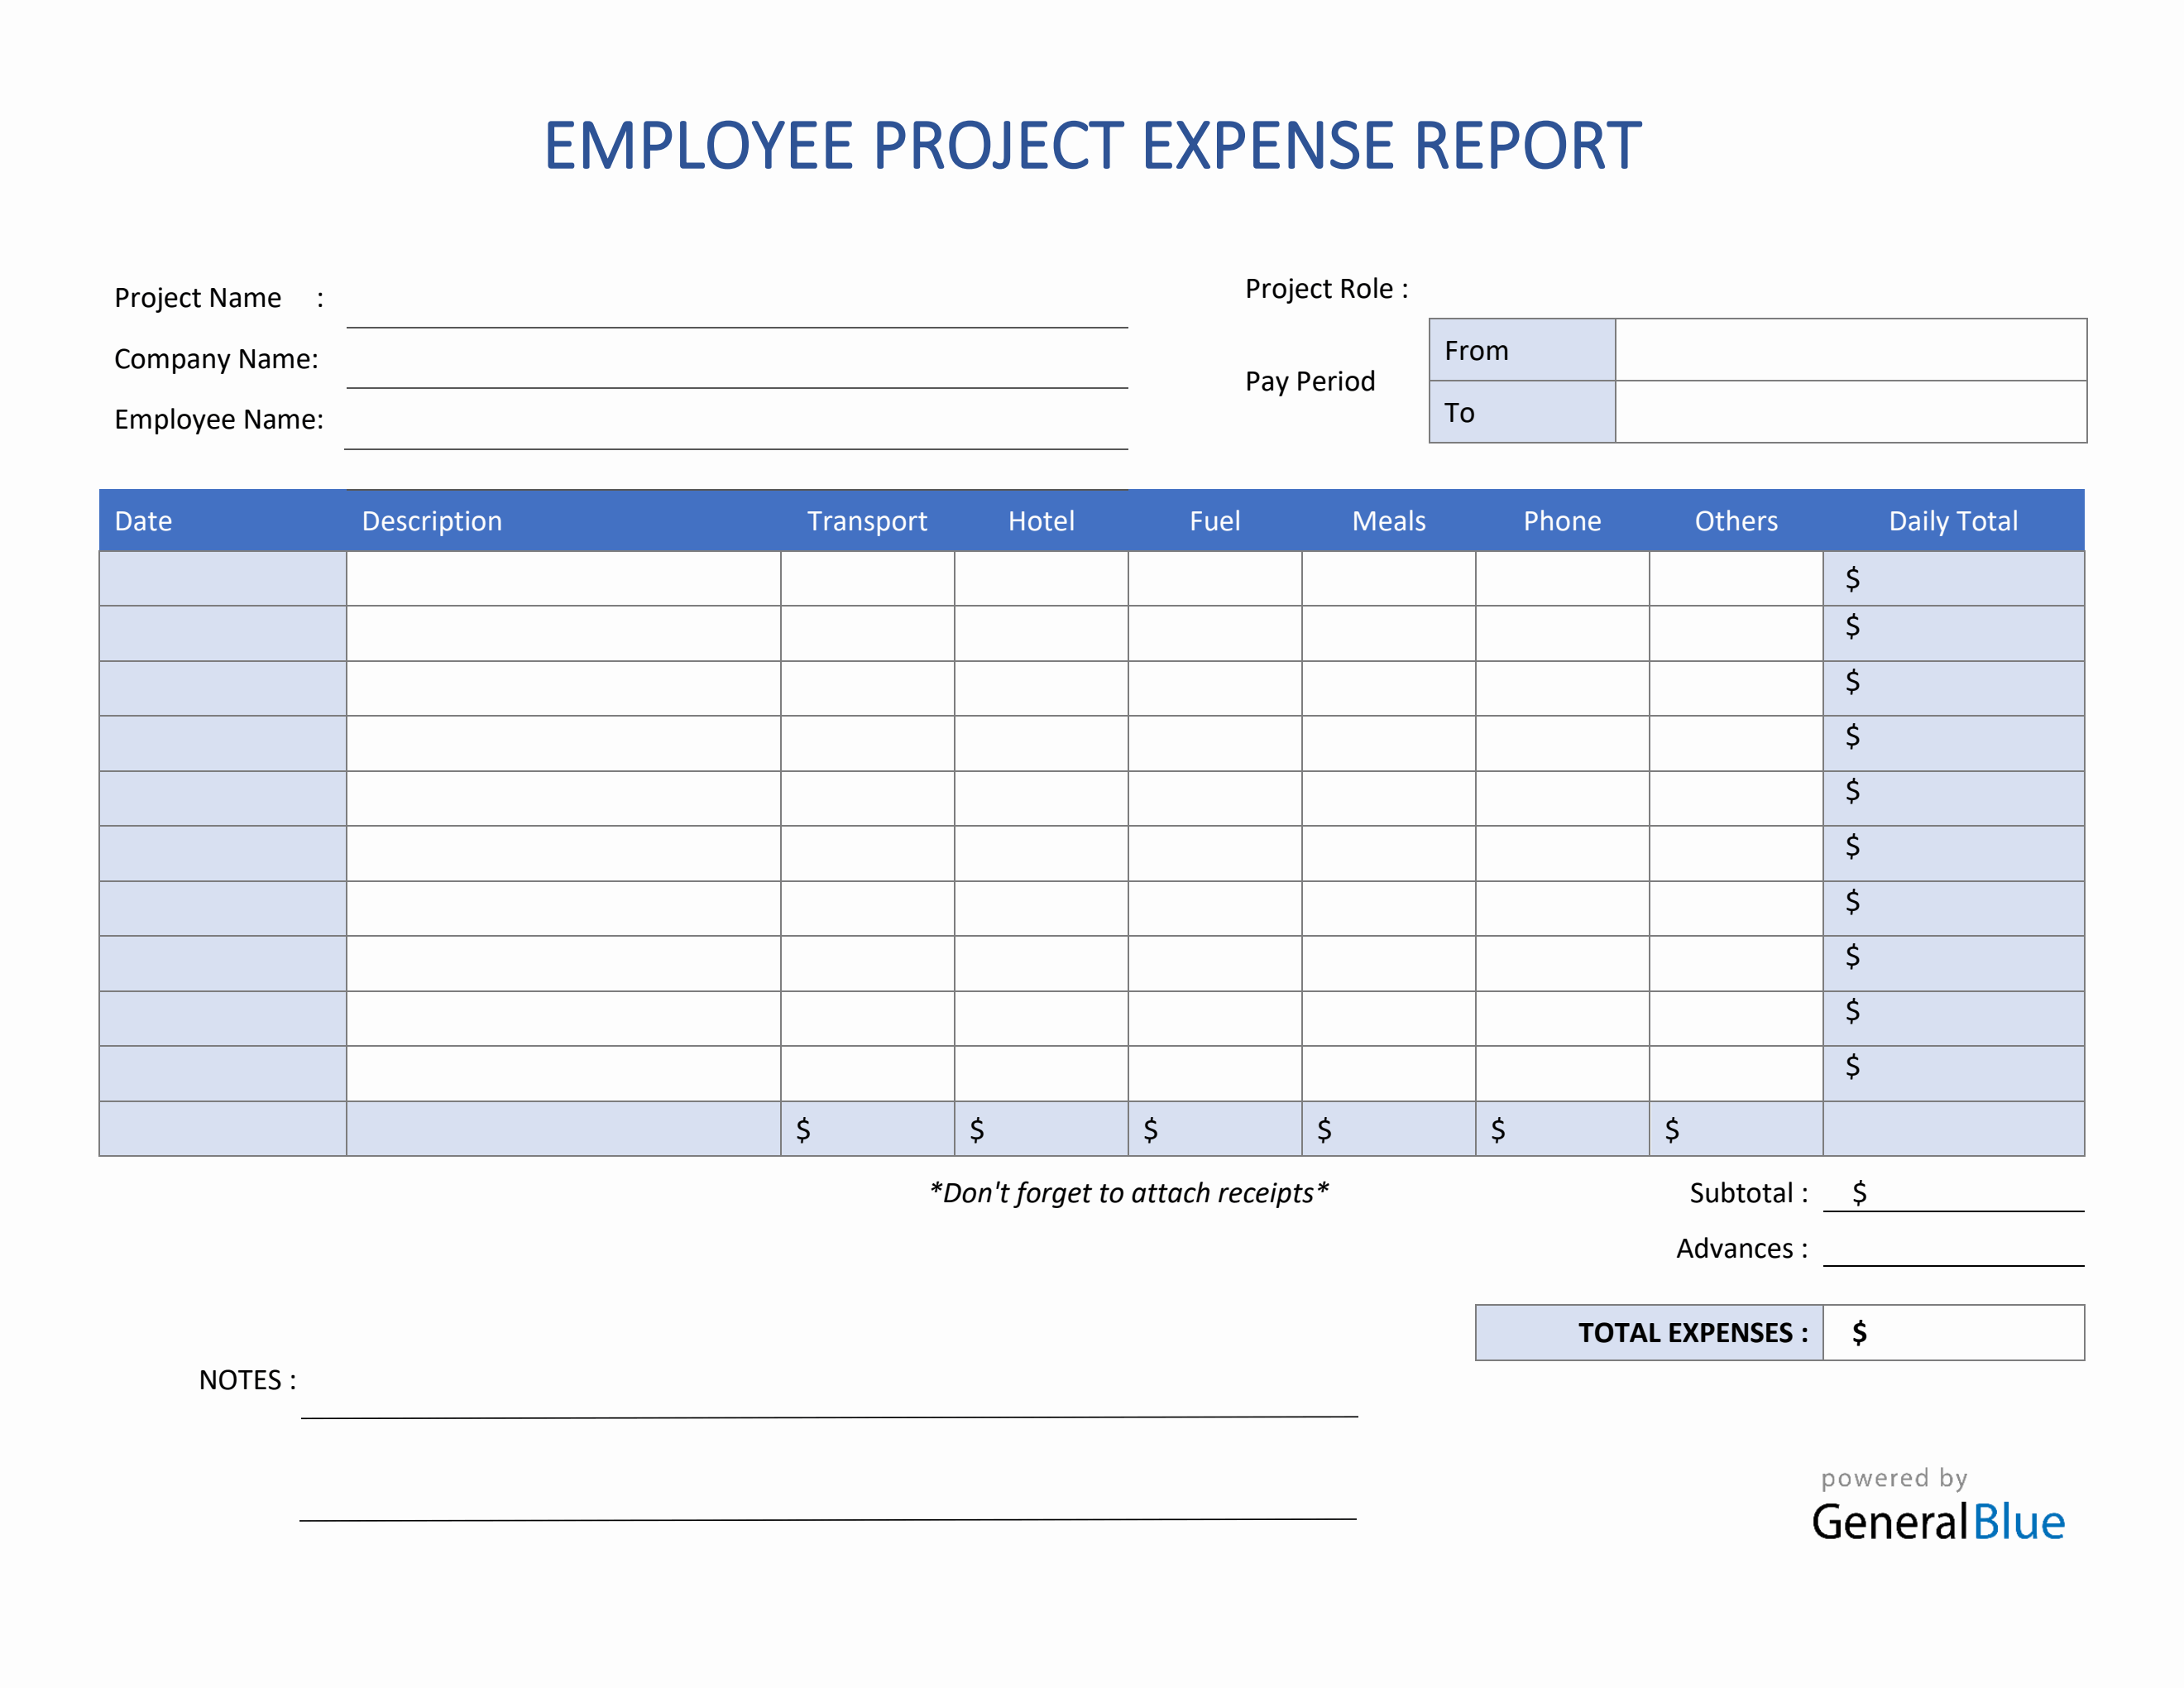 Employee Project Expense Report Template in PDF For Daily Expense Report Template